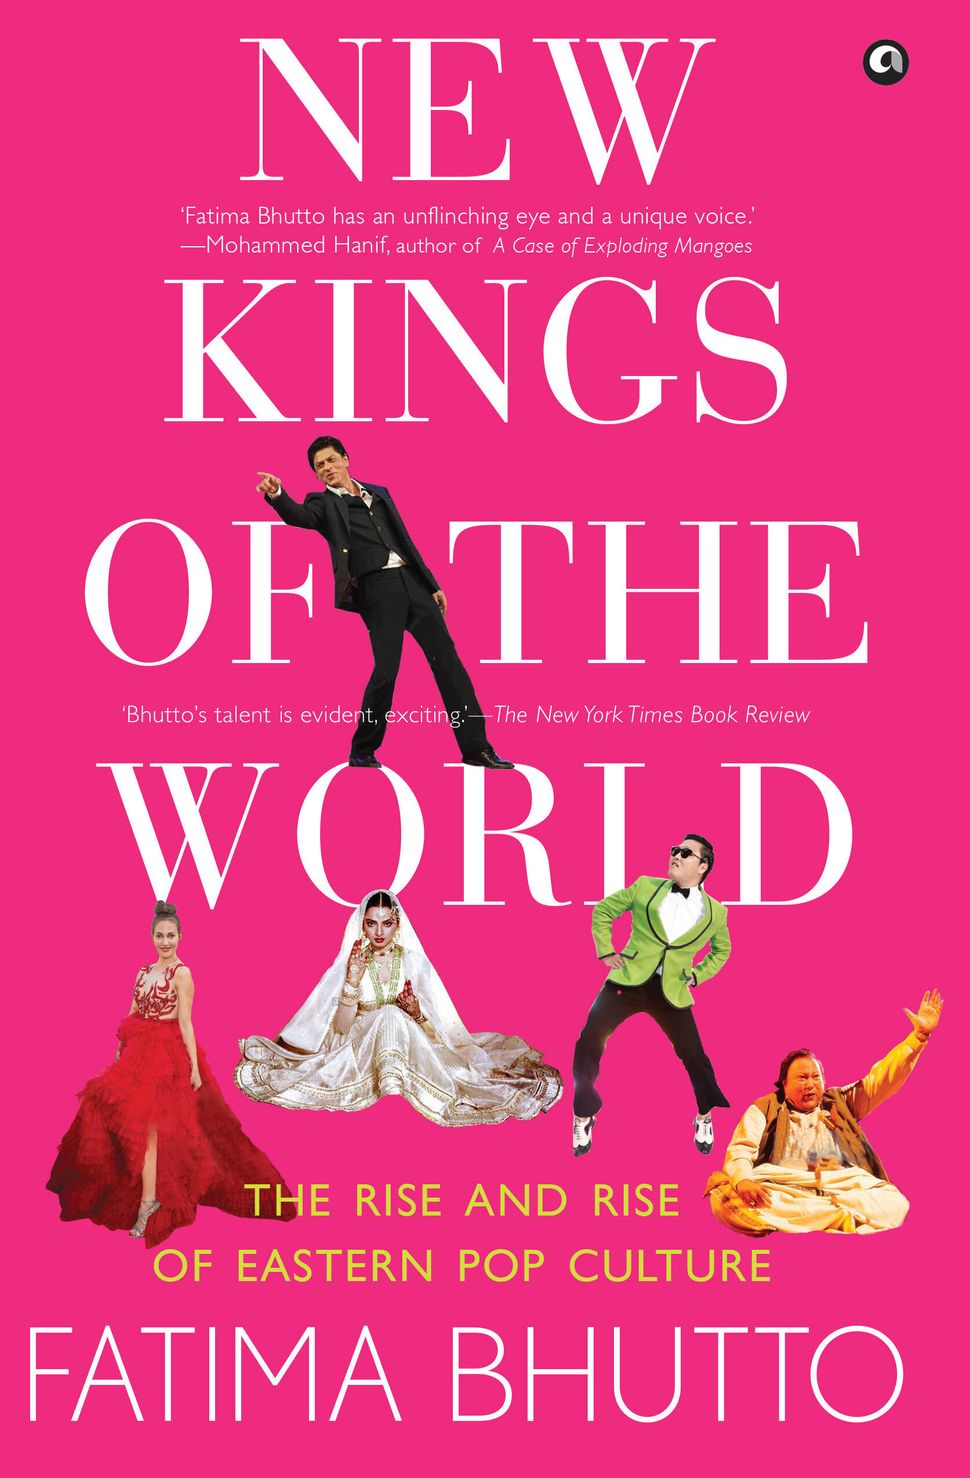 New Kings Of The World by Fatima Bhutto